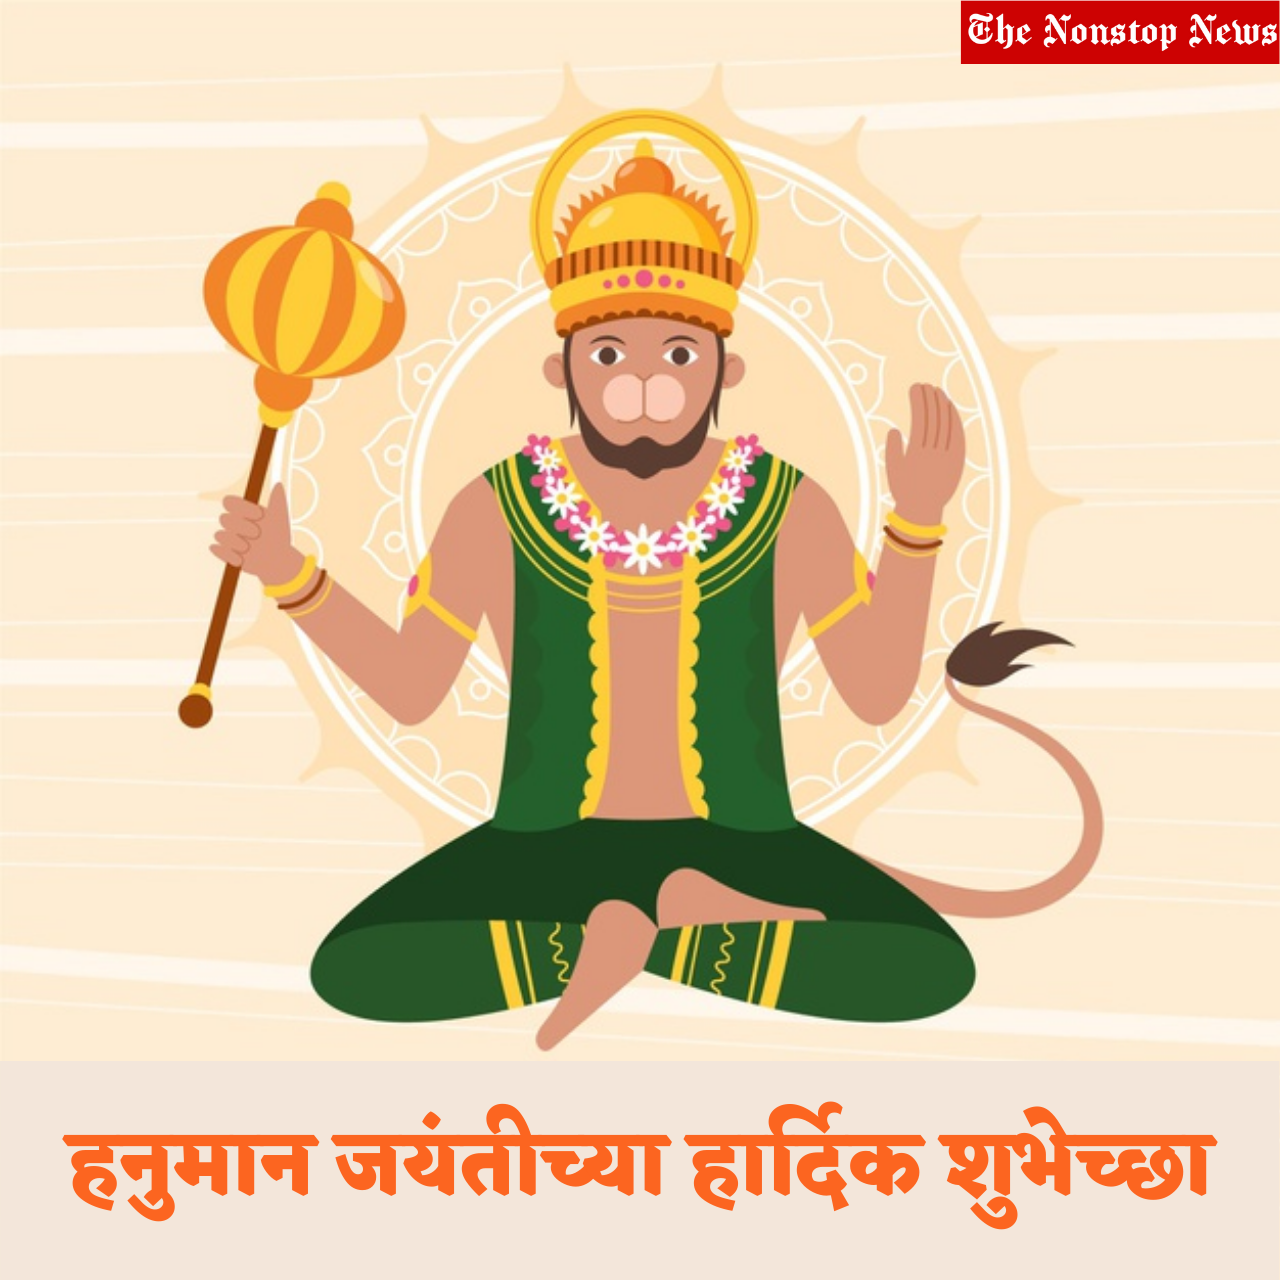 Happy Hanuman Jayanti 2021 wishes in Marathi, Greetings, Images, Messages, and Quotes to Share